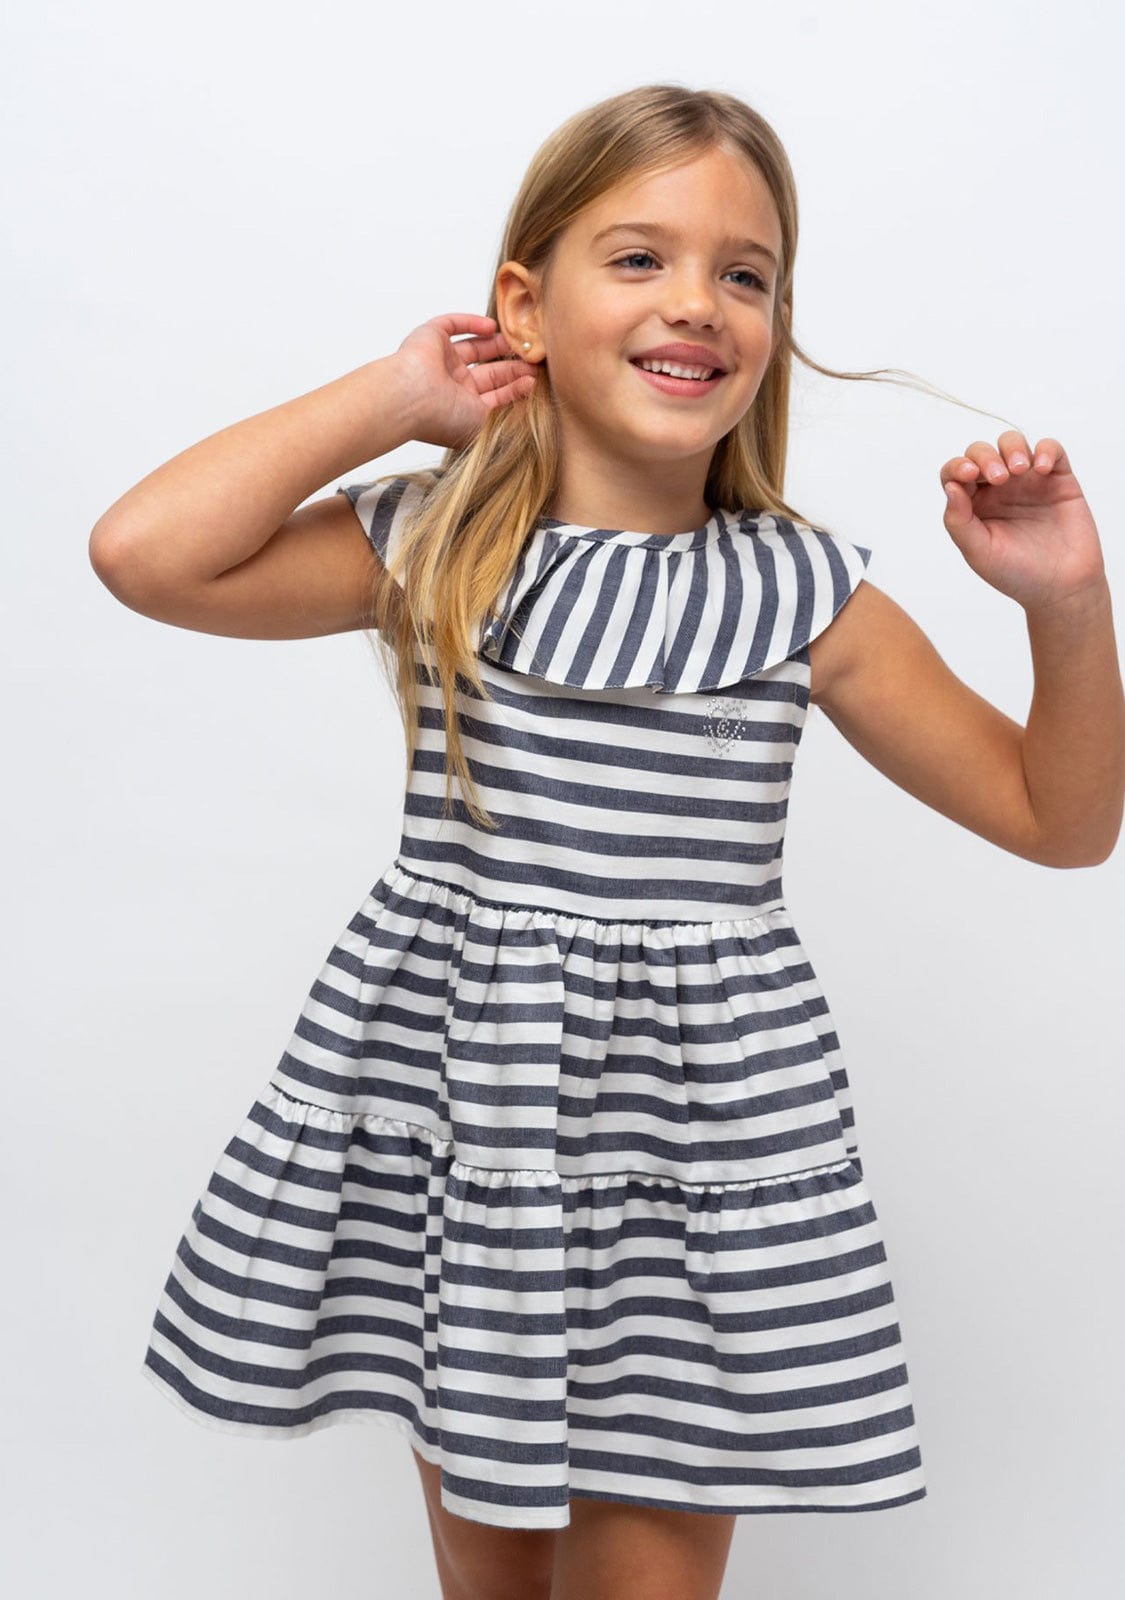 CONGUITOS TEXTIL Clothing Girl's Navy Ruffled Striped Dress